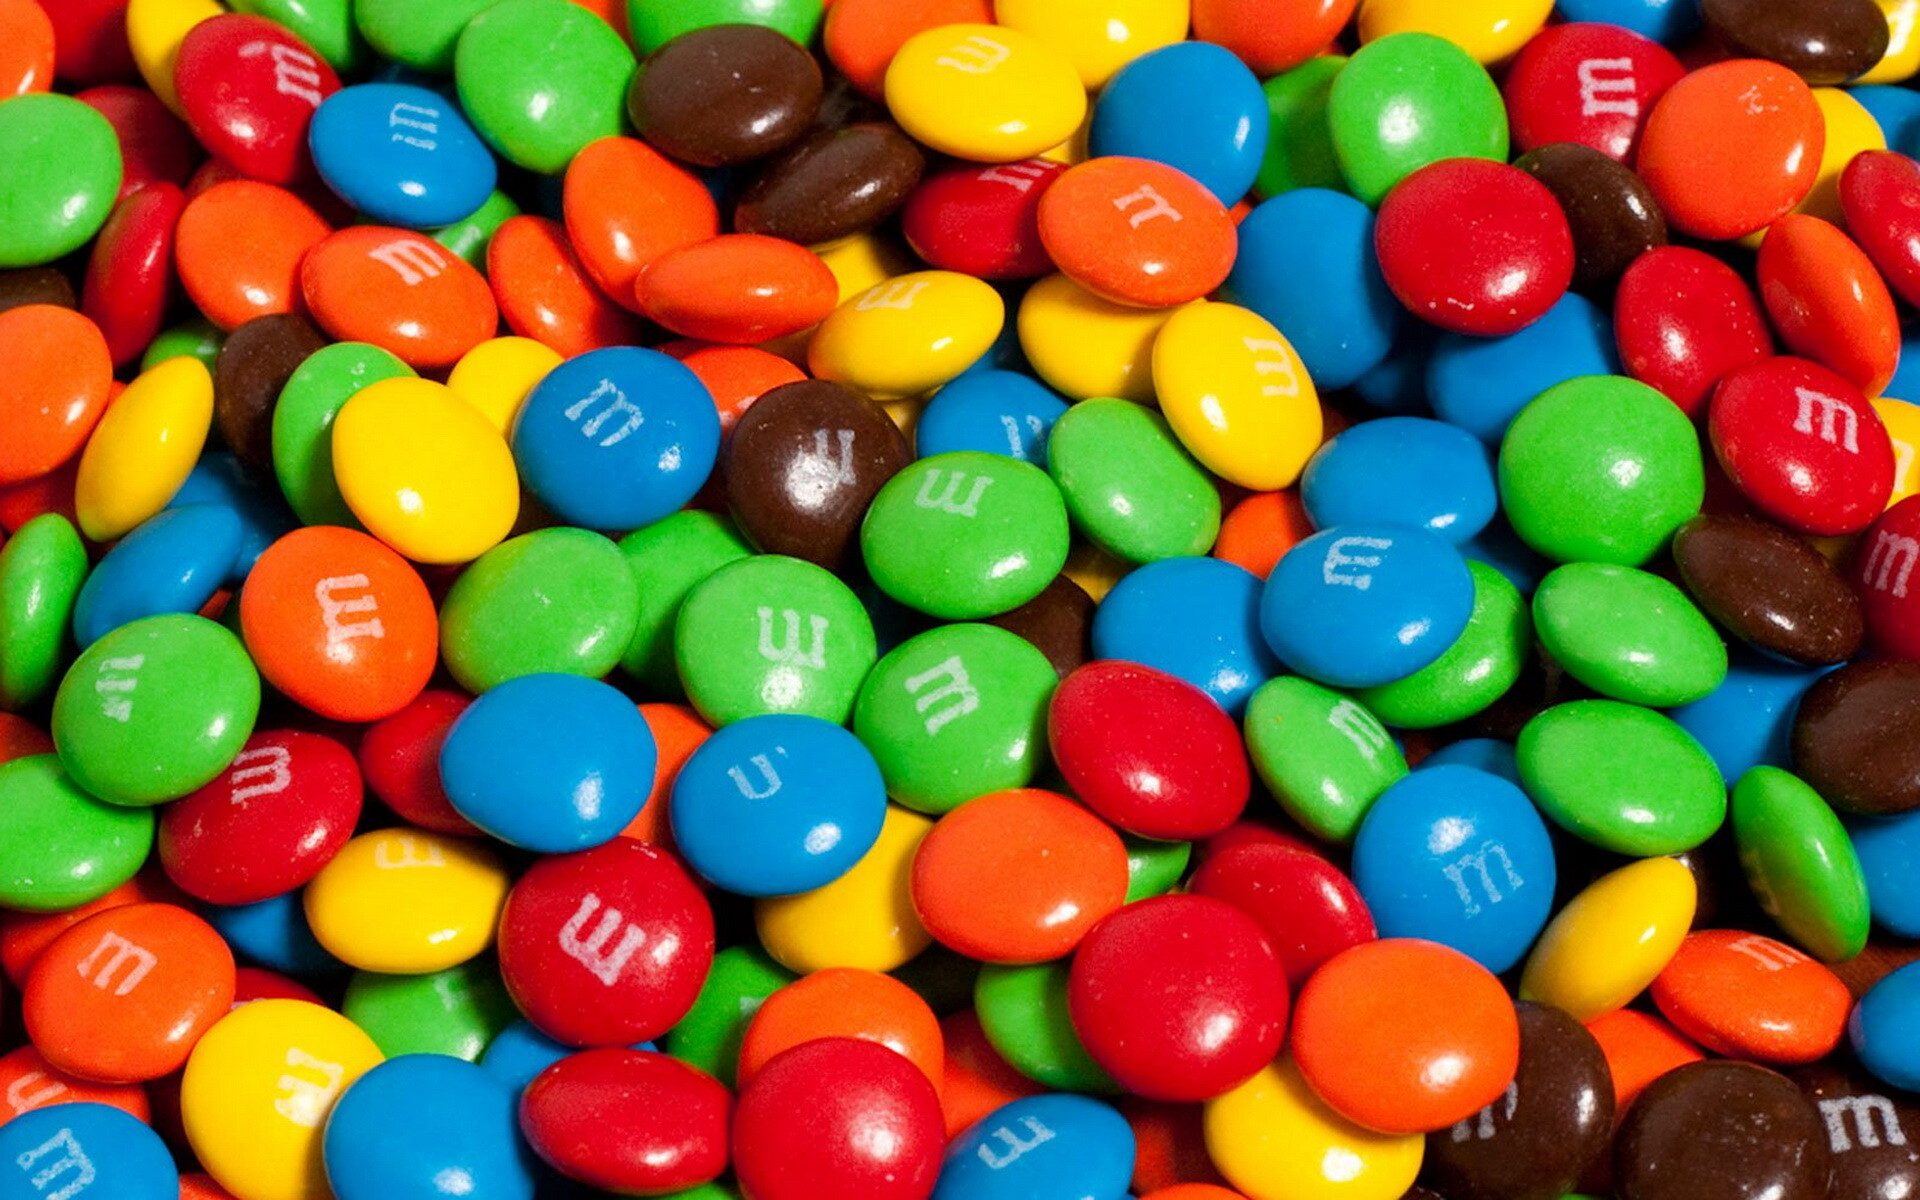 M&M’s: Small chocolate candies that are in the shape of something like a button. 1920x1200 HD Wallpaper.